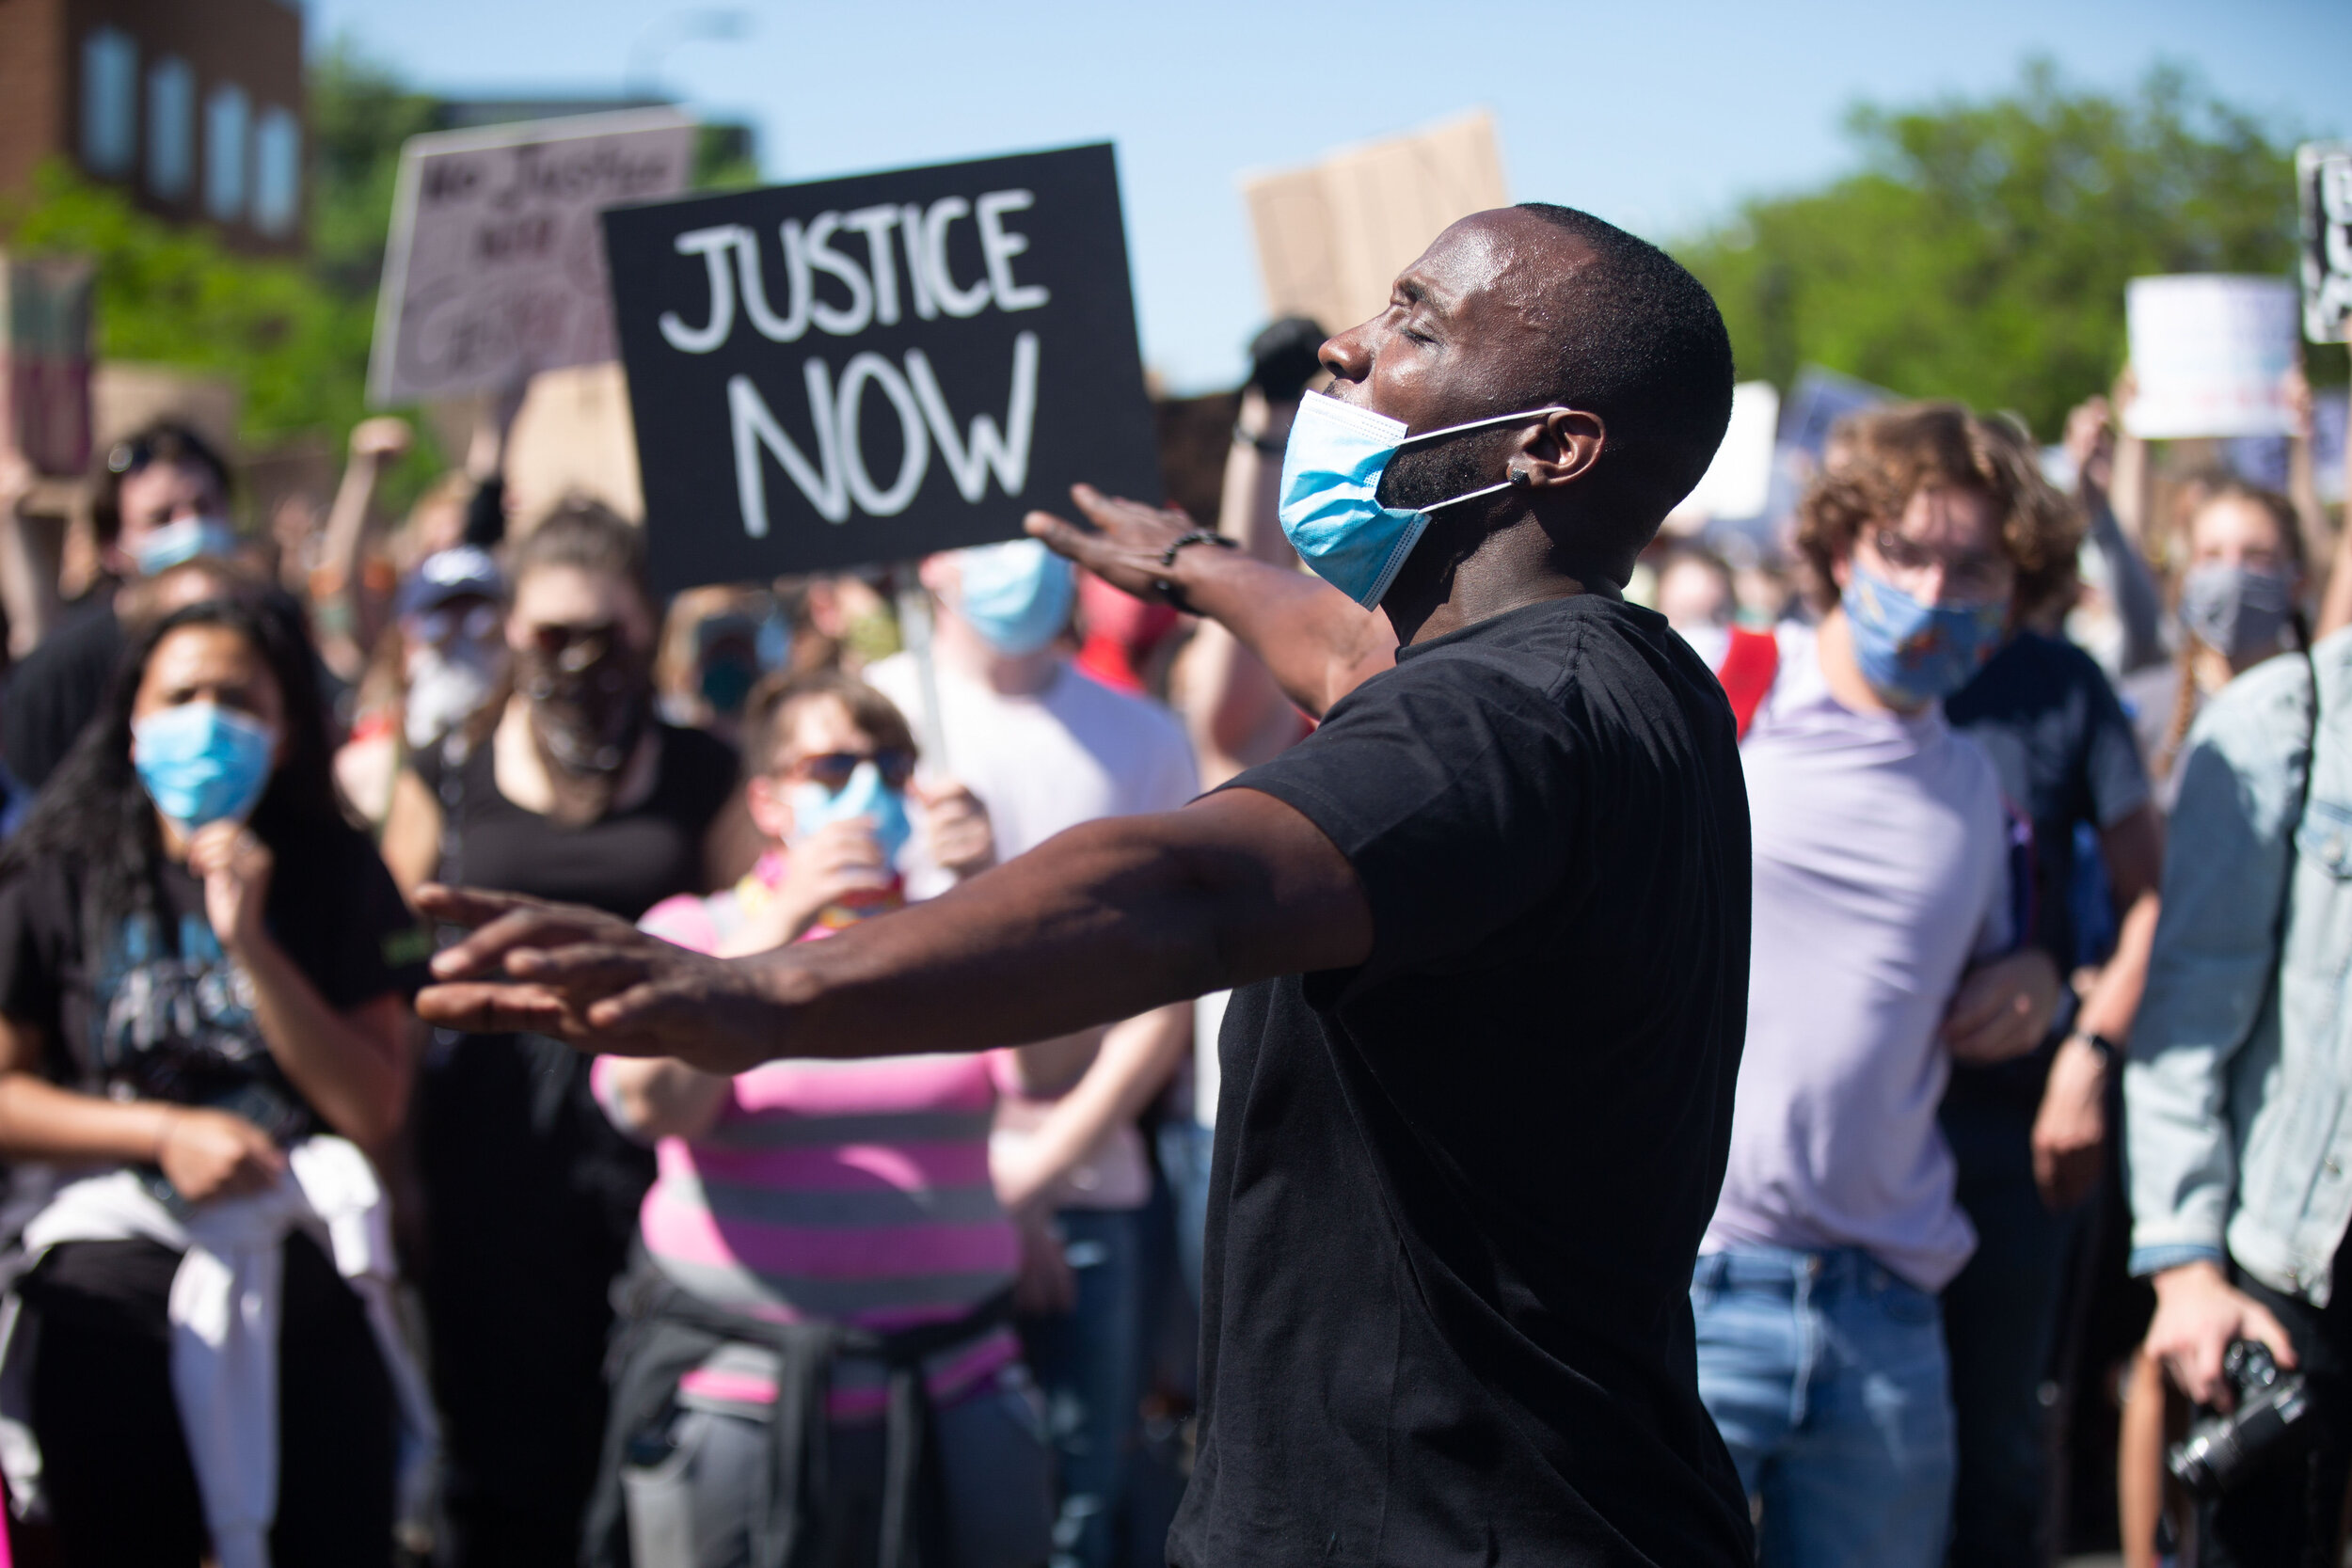  Chaz Moore from Canton, Ohio talks to a crowd of protesters that came out to protest the police killing of George Floyd in Minneapolis, Minnesota on May 30, 2020. Chris Juhn/Zuma. 